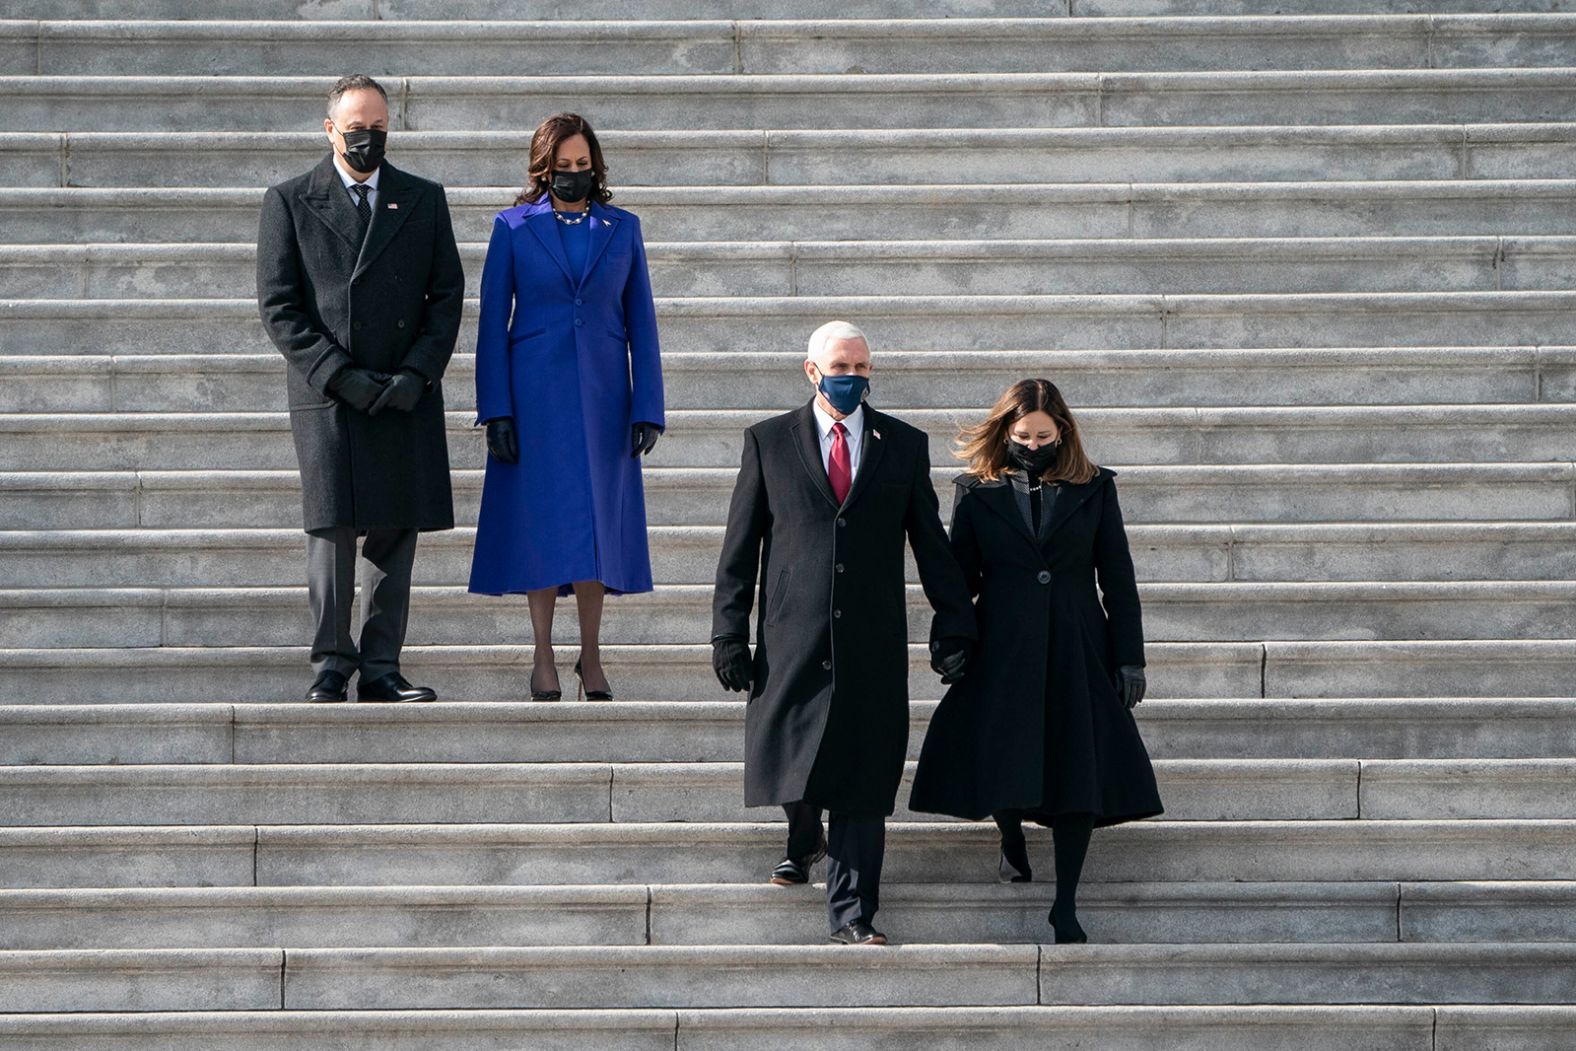 Harris and her husband, Doug Emhoff, follow former Vice President Mike Pence and second lady Karen Pence after the inauguration.